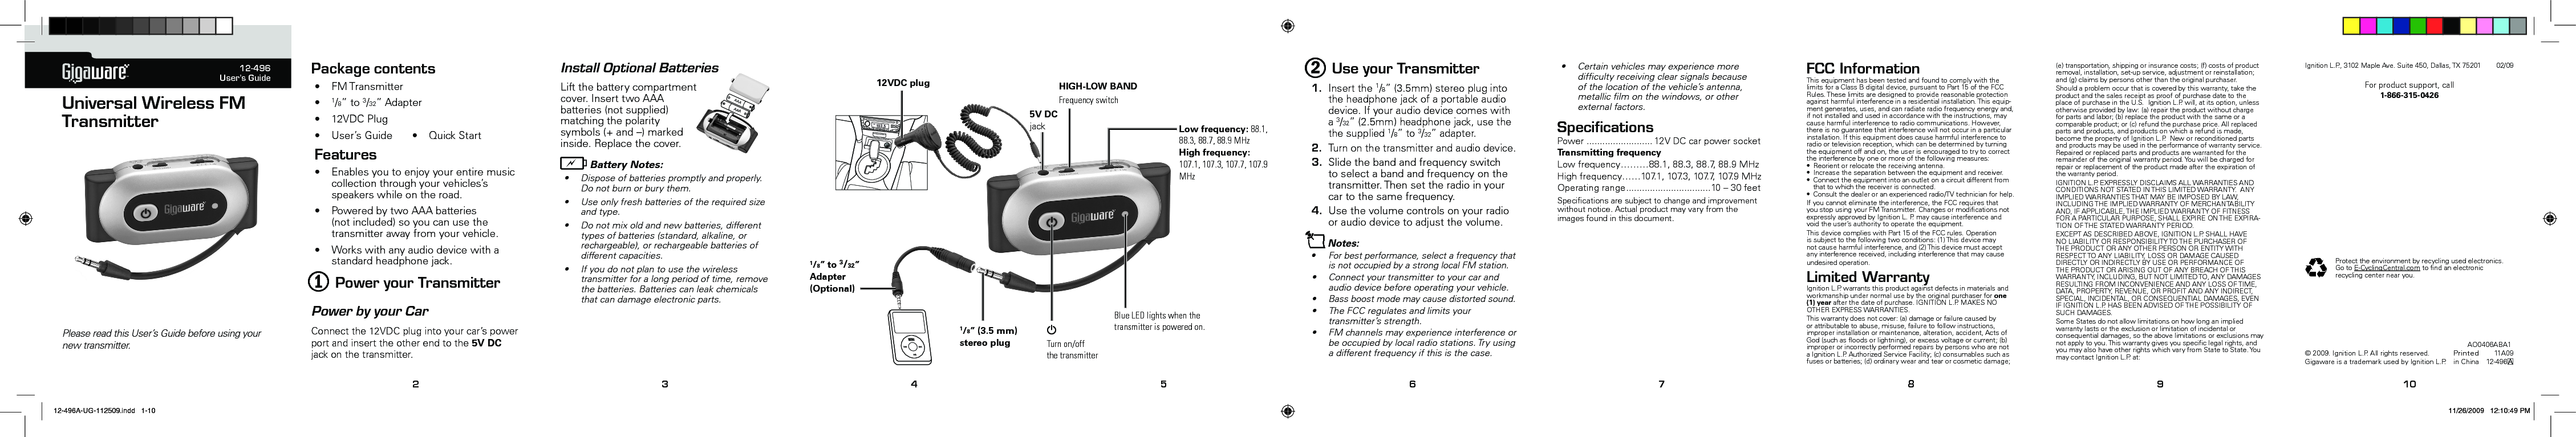 TM12-496User’s GuideUniversal Wireless FM TransmitterPlease read this User’s Guide before using your new transmitter. 2 3 4 5 6 7 8 9 10FM103.5Package contents• FMTransmitter• 1/8”to3/32”Adapter• 12VDCPlug• User’sGuide • QuickStartFeatures• Enablesyoutoenjoyyourentiremusiccollectionthroughyourvehicles’sspeakerswhileontheroad.• PoweredbytwoAAAbatteries(notincluded)soyoucanusethetransmitterawayfromyourvehicle.• Workswithanyaudiodevicewithastandardheadphonejack.1 Power your TransmitterPower by your CarConnectthe12VDCplugintoyourcar’spowerportandinserttheotherendtothe5V DCjackonthetransmitter.• Certainvehiclesmayexperiencemoredifcultyreceivingclearsignalsbecauseofthelocationofthevehicle’santenna,metalliclmonthewindows,orotherexternalfactors.SpeciﬁcationsPower......................... 12VDCcarpowersocketTransmitting frequencyLowfrequency………88.1,88.3,88.7,88.9MHzHighfrequency……107.1,107.3,107.7,107.9MHzOperatingrange................................10–30feetSpecicationsaresubjecttochangeandimprovementwithoutnotice.Actualproductmayvaryfromtheimagesfoundinthisdocument.FCC InformationThisequipmenthasbeentestedandfoundtocomplywiththelimitsforaClassBdigitaldevice,pursuanttoPart15oftheFCCRules.Theselimitsaredesignedtoprovidereasonableprotectionagainstharmfulinterferenceinaresidentialinstallation.Thisequip-mentgenerates,uses,andcanradiateradiofrequencyenergyand,ifnotinstalledandusedinaccordancewiththeinstructions,maycauseharmfulinterferencetoradiocommunications.However,thereisnoguaranteethatinterferencewillnotoccurinaparticularinstallation.Ifthisequipmentdoescauseharmfulinterferencetoradioortelevisionreception,whichcanbedeterminedbyturningtheequipmentoffandon,theuserisencouragedtotrytocorrecttheinterferencebyoneormoreofthefollowingmeasures:• Reorientorrelocatethereceivingantenna.• Increasetheseparationbetweentheequipmentandreceiver.• Connecttheequipmentintoanoutletonacircuitdifferentfromthattowhichthereceiverisconnected.• Consultthedealeroranexperiencedradio/TVtechnicianforhelp.Ifyoucannoteliminatetheinterference,theFCCrequiresthatyoustopusingyourFMTransmitter.ChangesormodicationsnotexpresslyapprovedbyIgnitionL.P.maycauseinterferenceandvoidtheuser’sauthoritytooperatetheequipment.ThisdevicecomplieswithPart15oftheFCCrules.Operationissubjecttothefollowingtwoconditions:(1)Thisdevicemaynotcauseharmfulinterference,and(2)Thisdevicemustacceptanyinterferencereceived,includinginterferencethatmaycauseundesiredoperation.Limited WarrantyIgnitionL.P.warrantsthisproductagainstdefectsinmaterialsandworkmanshipundernormalusebytheoriginalpurchaserforone (1) yearafterthedateofpurchase.IGNITIONL.P.MAKESNOOTHEREXPRESSWARRANTIES.Thiswarrantydoesnotcover:(a)damageorfailurecausedbyorattributabletoabuse,misuse,failuretofollowinstructions,improperinstallationormaintenance,alteration,accident,ActsofGod(suchasoodsorlightning),orexcessvoltageorcurrent;(b)improperorincorrectlyperformedrepairsbypersonswhoarenotaIgnitionL.P.AuthorizedServiceFacility;(c)consumablessuchasfusesorbatteries;(d)ordinarywearandtearorcosmeticdamage;PrintedinChina11A0912-496A©2009.IgnitionL.P.Allrightsreserved.GigawareisatrademarkusedbyIgnitionL.P.(e)transportation,shippingorinsurancecosts;(f)costsofproductremoval,installation,set-upservice,adjustmentorreinstallation;and(g)claimsbypersonsotherthantheoriginalpurchaser.Shouldaproblemoccurthatiscoveredbythiswarranty,taketheproductandthesalesreceiptasproofofpurchasedatetotheplaceofpurchaseintheU.S.IgnitionL.P.will,atitsoption,unlessotherwiseprovidedbylaw:(a)repairtheproductwithoutchargeforpartsandlabor;(b)replacetheproductwiththesameoracomparableproduct;or(c)refundthepurchaseprice.Allreplacedpartsandproducts,andproductsonwhicharefundismade,becomethepropertyofIgnitionL.P.Neworreconditionedpartsandproductsmaybeusedintheperformanceofwarrantyservice.Repairedorreplacedpartsandproductsarewarrantedfortheremainderoftheoriginalwarrantyperiod.Youwillbechargedforrepairorreplacementoftheproductmadeaftertheexpirationofthewarrantyperiod.IGNITIONL.P.EXPRESSLYDISCLAIMSALLWARRANTIESANDCONDITIONSNOTSTATEDINTHISLIMITEDWARRANTY.ANYIMPLIEDWARRANTIESTHATMAYBEIMPOSEDBYLAW,INCLUDINGTHEIMPLIEDWARRANTYOFMERCHANTABILITYAND,IFAPPLICABLE,THEIMPLIEDWARRANTYOFFITNESSFORAPARTICULARPURPOSE,SHALLEXPIREONTHEEXPIRA-TIONOFTHESTATEDWARRANTYPERIOD.EXCEPTASDESCRIBEDABOVE,IGNITIONL.P.SHALLHAVENOLIABILITYORRESPONSIBILITYTOTHEPURCHASEROFTHEPRODUCTORANYOTHERPERSONORENTITYWITHRESPECTTOANYLIABILITY,LOSSORDAMAGECAUSEDDIRECTLYORINDIRECTLYBYUSEORPERFORMANCEOFTHEPRODUCTORARISINGOUTOFANYBREACHOFTHISWARRANTY,INCLUDING,BUTNOTLIMITEDTO,ANYDAMAGESRESULTINGFROMINCONVENIENCEANDANYLOSSOFTIME,DATA,PROPERTY,REVENUE,ORPROFITANDANYINDIRECT,SPECIAL,INCIDENTAL,ORCONSEQUENTIALDAMAGES,EVENIFIGNITIONL.P.HASBEENADVISEDOFTHEPOSSIBILITYOFSUCHDAMAGES.SomeStatesdonotallowlimitationsonhowlonganimpliedwarrantylastsortheexclusionorlimitationofincidentalorconsequentialdamages,sotheabovelimitationsorexclusionsmaynotapplytoyou.Thiswarrantygivesyouspeciclegalrights,andyoumayalsohaveotherrightswhichvaryfromStatetoState.YoumaycontactIgnitionL.P.at:Install Optional BatteriesLiftthebatterycompartmentcover.InserttwoAAAbatteries(notsupplied)matchingthepolaritysymbols(+and–)markedinside.Replacethecover.bBattery Notes:• Disposeofbatteriespromptlyandproperly.Donotburnorburythem.• Useonlyfreshbatteriesoftherequiredsizeandtype.• Donotmixoldandnewbatteries,differenttypesofbatteries(standard,alkaline,orrechargeable),orrechargeablebatteriesofdifferentcapacities.• Ifyoudonotplantousethewirelesstransmitterforalongperiodoftime,removethebatteries.Batteriescanleakchemicalsthatcandamageelectronicparts.Protecttheenvironmentbyrecyclingusedelectronics.GotoE-CyclingCentral.comtondanelectronicrecyclingcenternearyou.AO0406ABA12 Use your Transmitter1. Insertthe1/8”(3.5mm)stereoplugintotheheadphonejackofaportableaudiodevice.Ifyouraudiodevicecomeswitha3/32”(2.5mm)headphonejack,usethethesupplied1/8”to3/32”adapter.2. Turnonthetransmitterandaudiodevice.3. Slidethebandandfrequency switchtoselectabandandfrequencyonthetransmitter.Thensettheradioinyourcartothesamefrequency.4. Usethevolumecontrolsonyourradiooraudiodevicetoadjustthevolume.nNotes: • Forbestperformance,selectafrequencythatisnotoccupiedbyastronglocalFMstation.• Connectyourtransmittertoyourcarandaudiodevicebeforeoperatingyourvehicle.• Bassboostmodemaycausedistortedsound.• TheFCCregulatesandlimitsyourtransmitter’s strength.• FMchannelsmayexperienceinterferenceorbeoccupiedbylocalradiostations.Tryusingadifferentfrequencyifthisisthecase.5V DC jackHIGH-LOW BANDFrequency switchLow frequency: 88.1, 88.3, 88.7, 88.9 MHzHigh frequency: 107.1, 107.3, 107.7, 107.9 MHzGTurn on/off  the transmitterBlue LED lights when the transmitter is powered on.1/8” (3.5 mm)stereo plug1/8” to 3/32” Adapter (Optional)12VDC plugAAAAAAIgnitionL.P.,3102MapleAve.Suite450,Dallas,TX7520102/09Forproductsupport,call1-866-315-042612-496A-UG-112509.indd   1-10 11/26/2009   12:10:49 PM